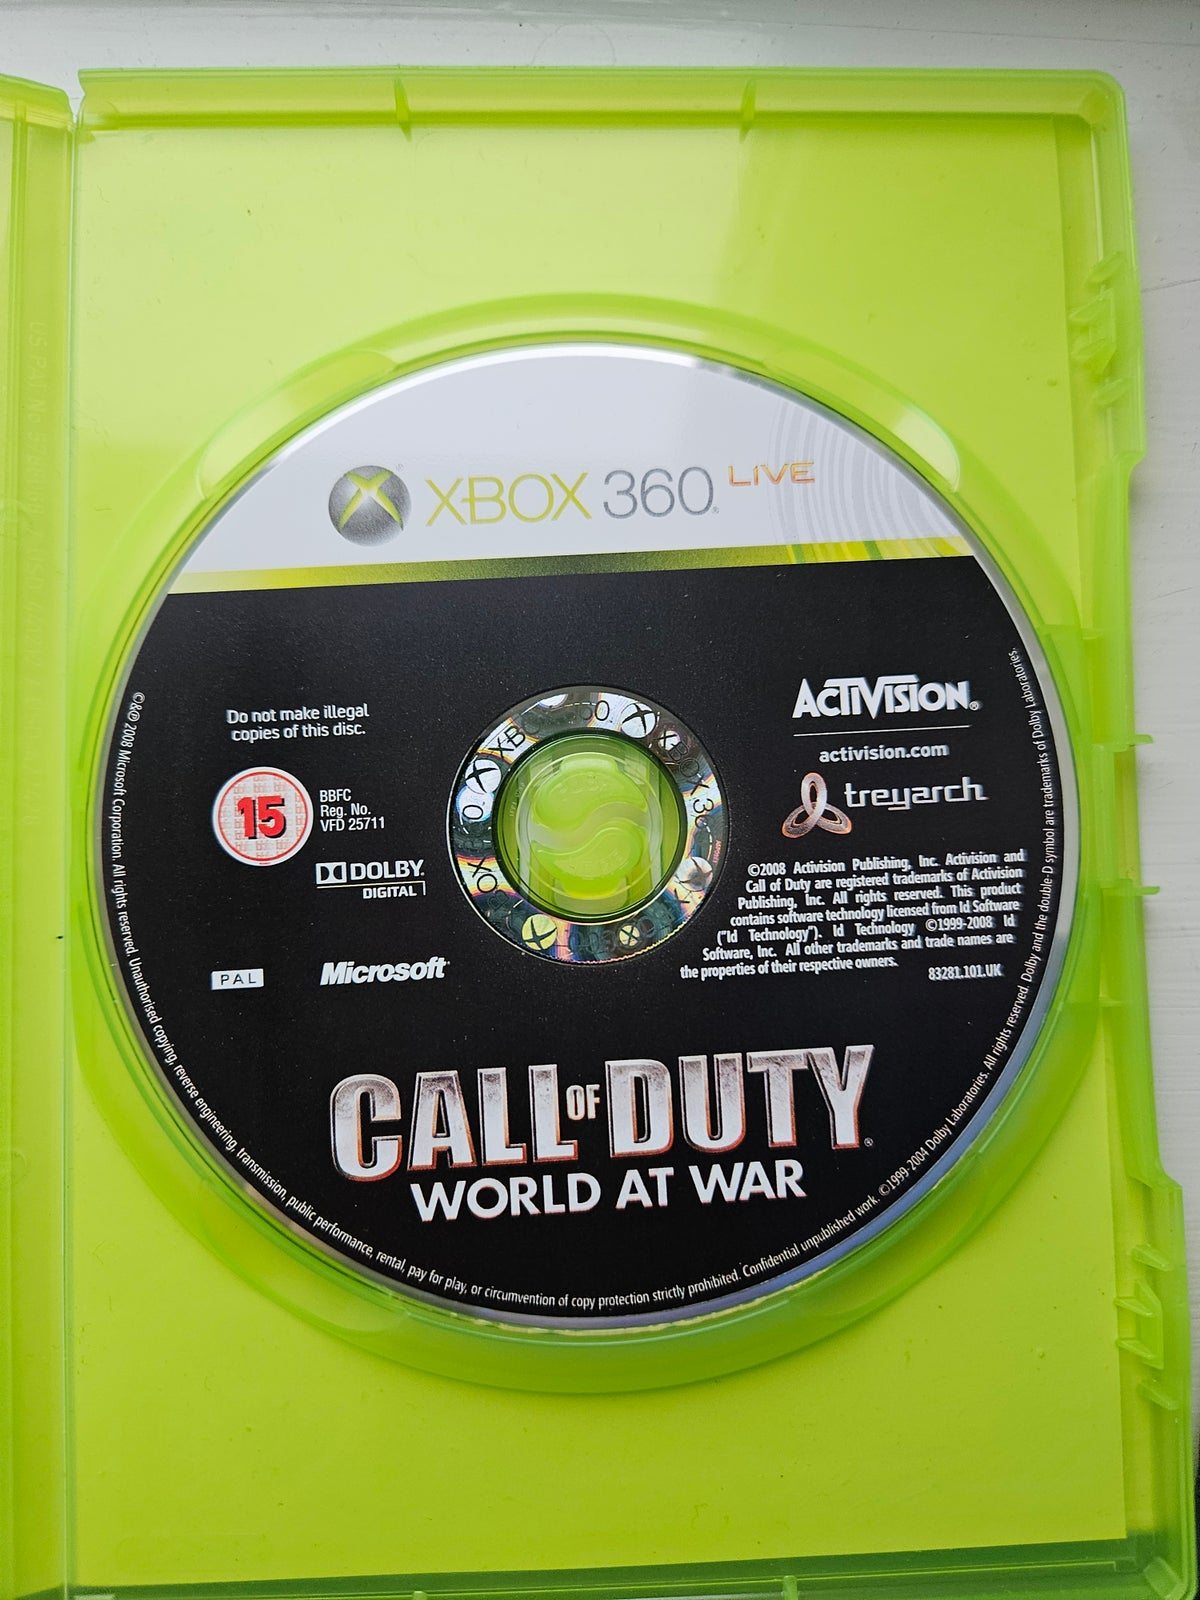 Call of duty world at war, Xbox 360, FPS